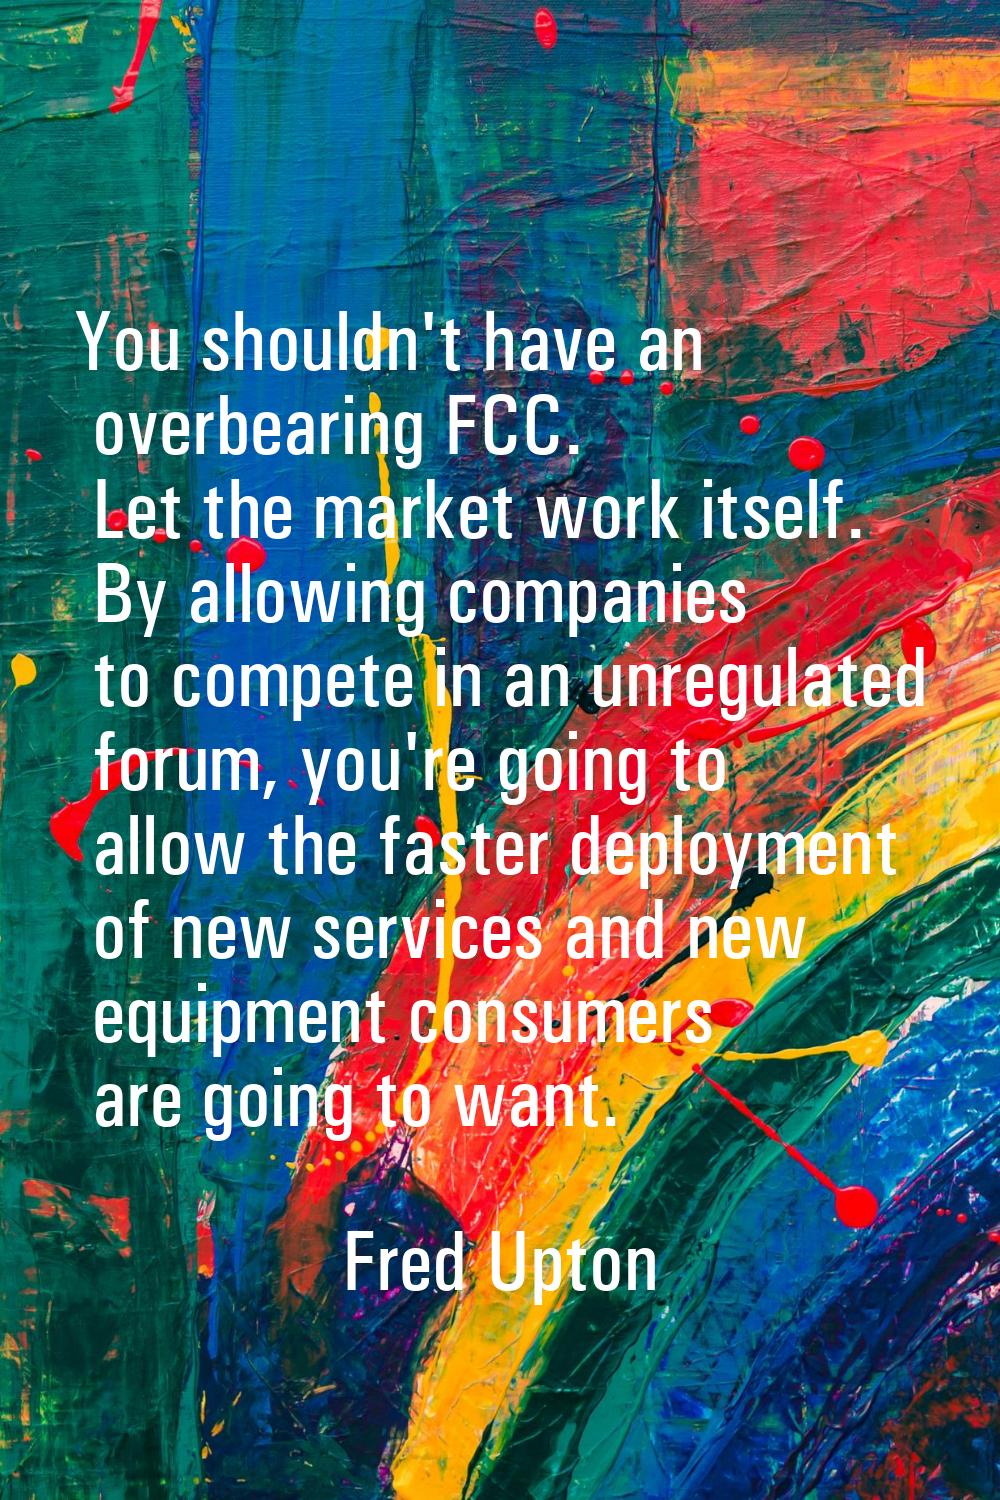 You shouldn't have an overbearing FCC. Let the market work itself. By allowing companies to compete